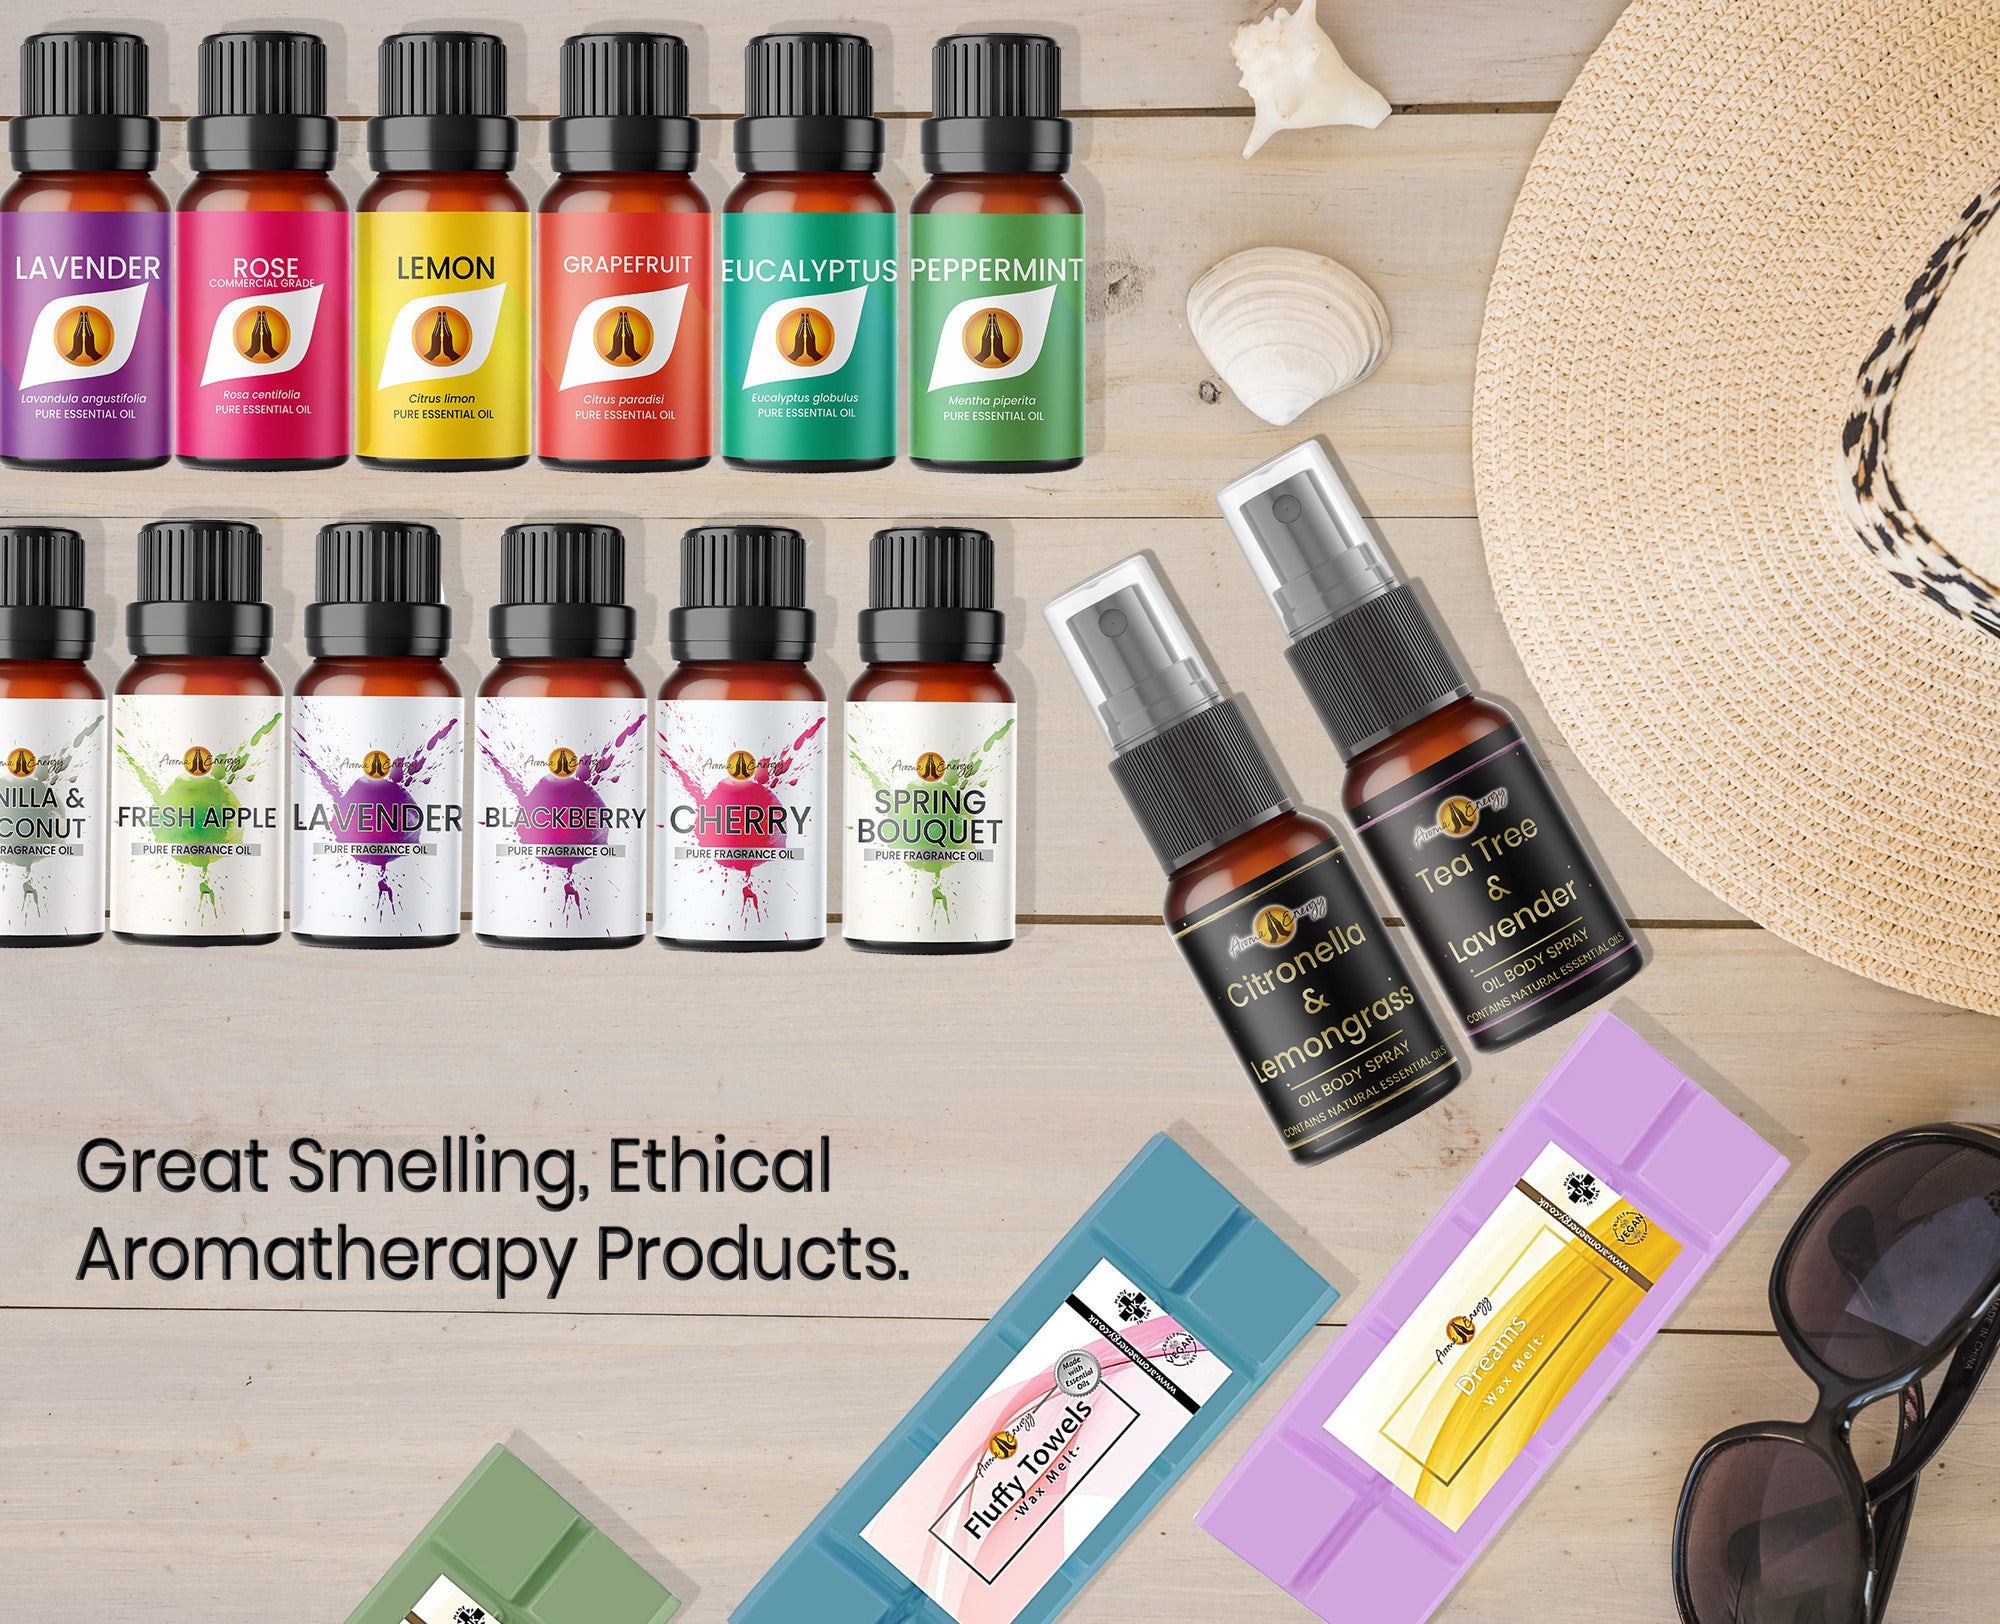 Load video: Aroma Energy Essential Fragrance Oils, Wax Melts, Sprays, Candles Video